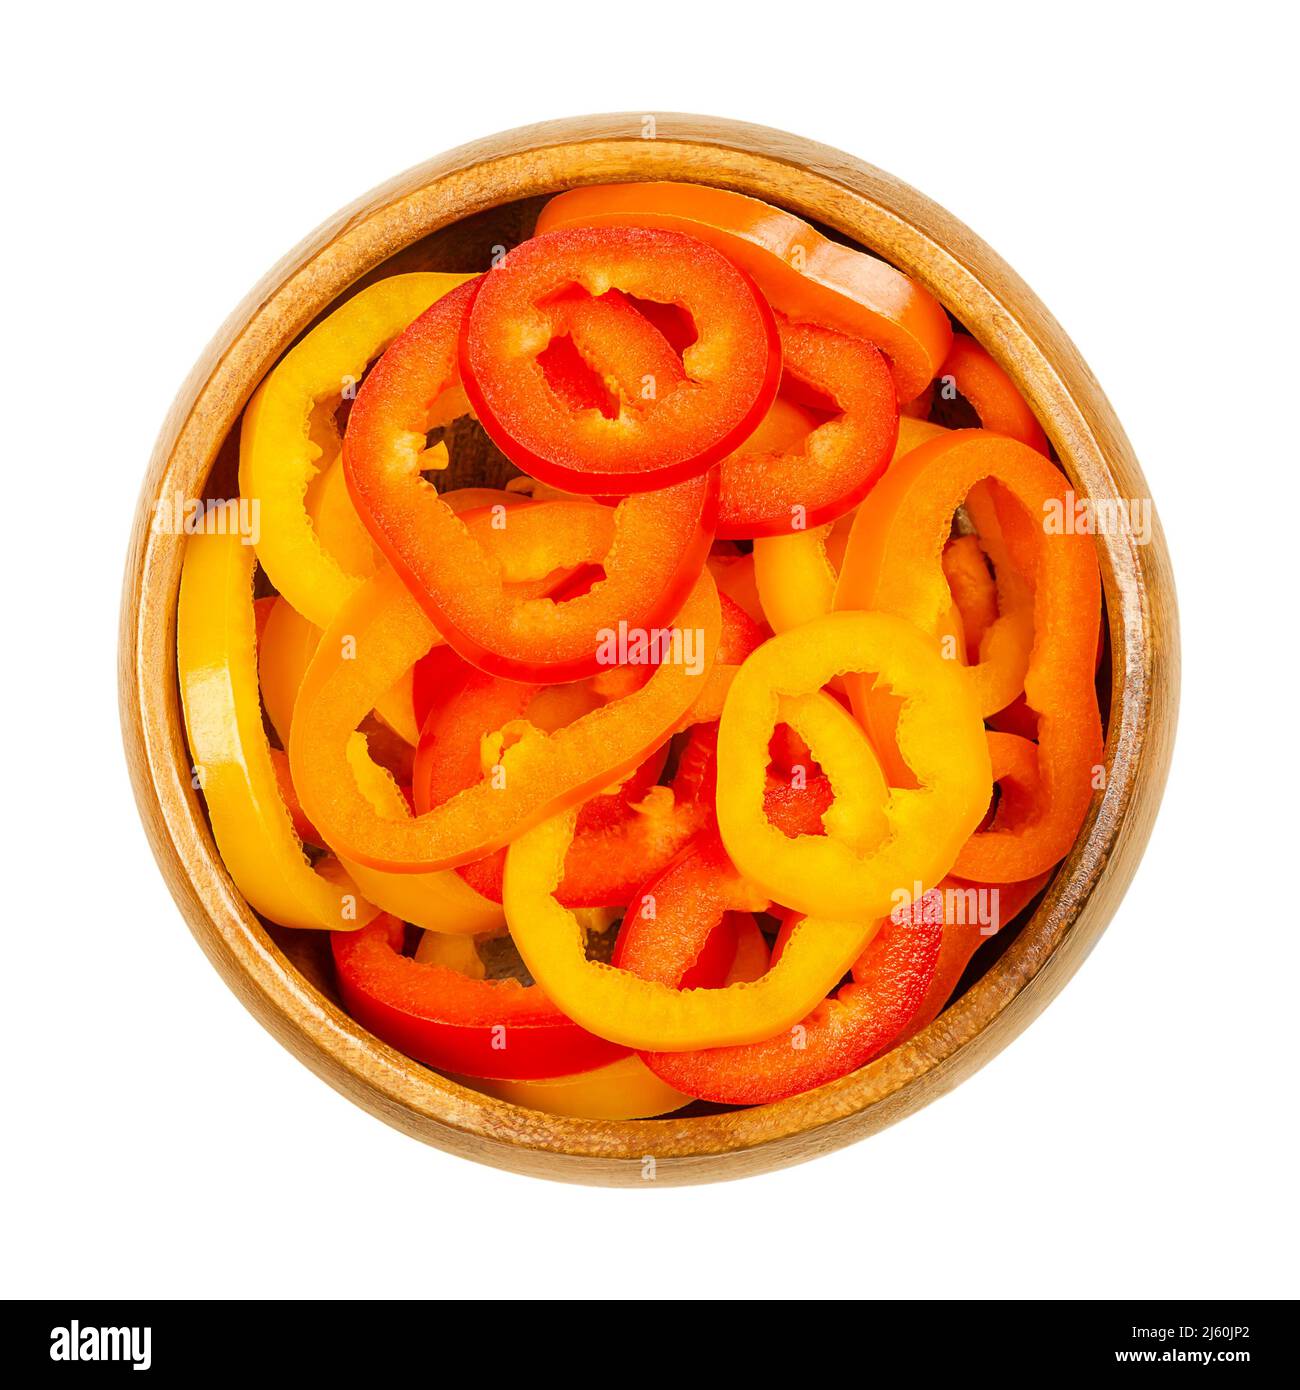 Sliced snacking mini sweet peppers, in a wooden bowl. Cross sections of ripe and fresh bell peppers, also called capsicums. Fruits of Capsicum annuum. Stock Photo